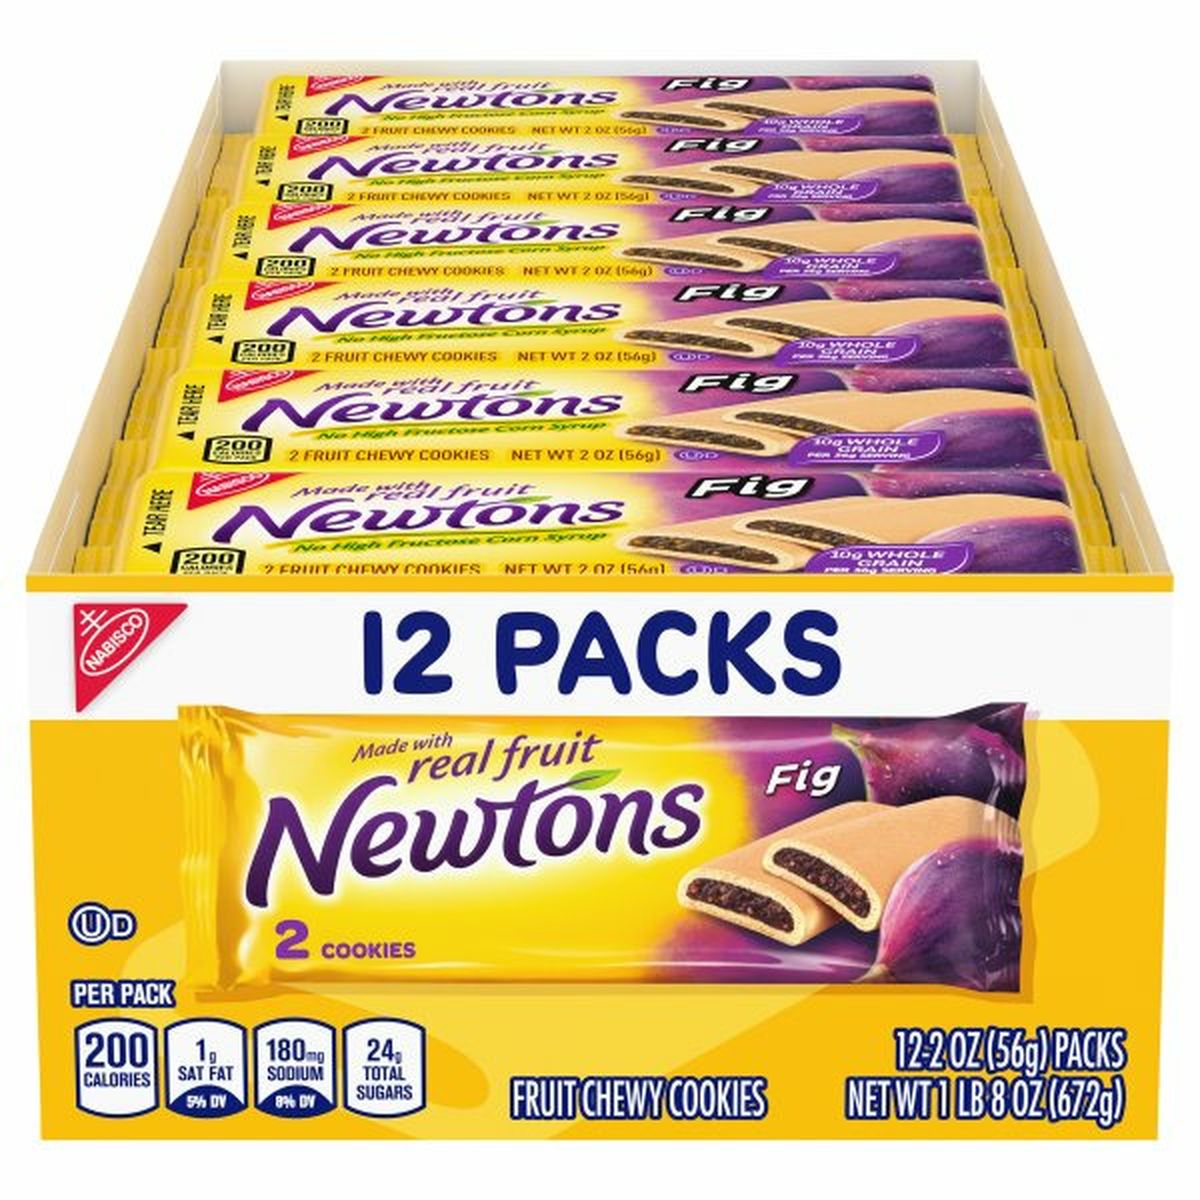 Calories in Newtons Cookies, Fruit Chewy, Fig, 12 Pack